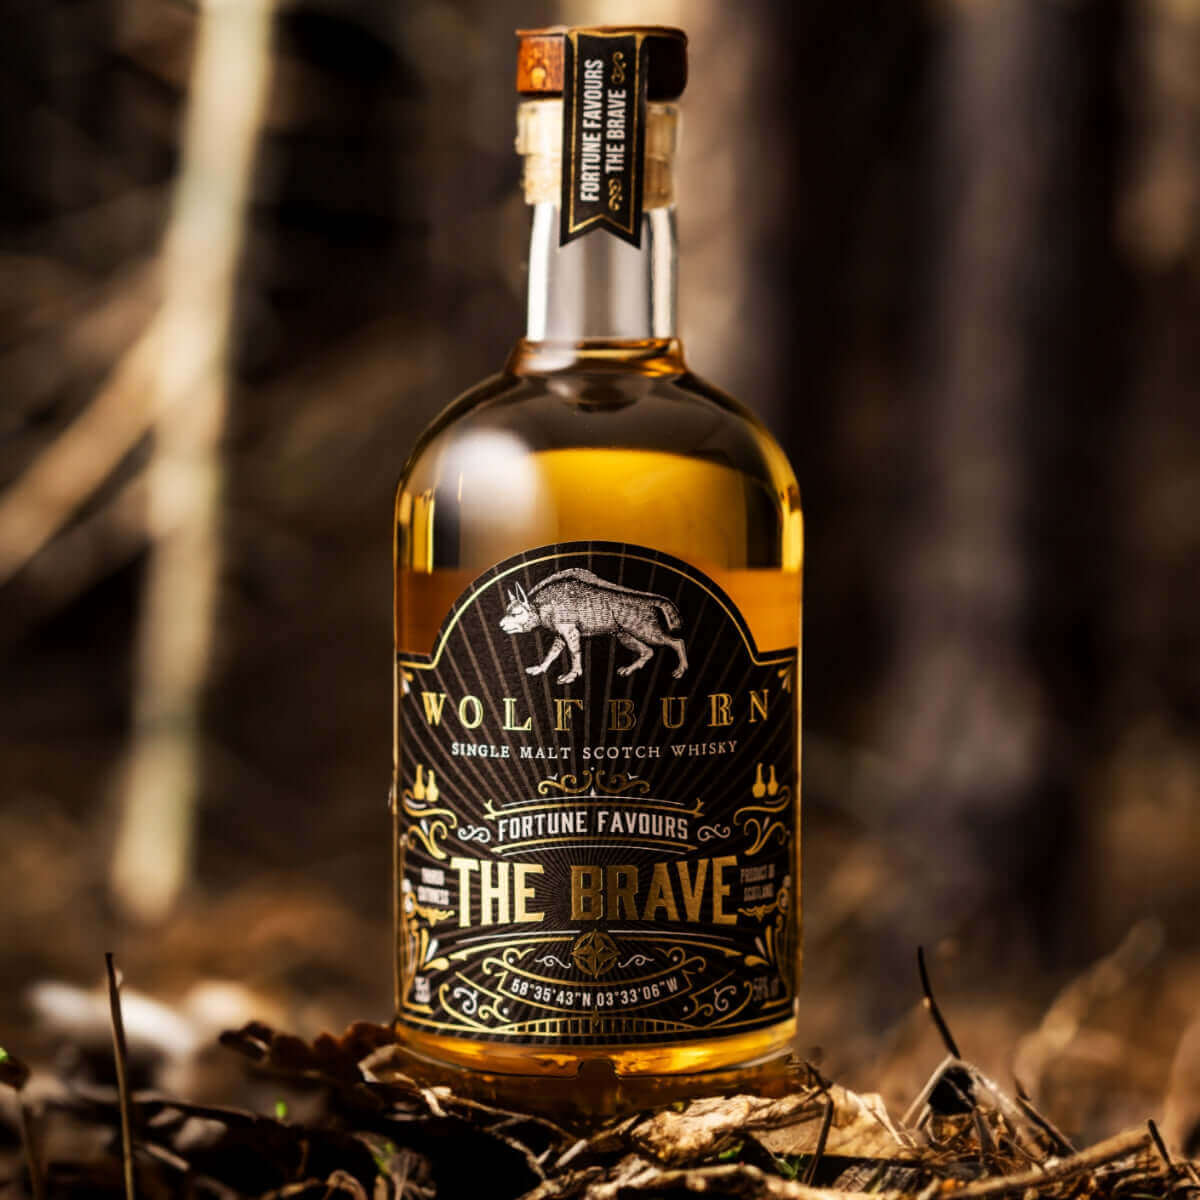 Wolfburn Fortune Favours the Brave – 58% vol. 35cl The 35cl Fortune Favours the Brave Langskip edition at 58%. Matured exclusively in first-fill ex-bourbon barrels. Distilled, matured and bottled at Wolfburn Distillery in Caithness, Scotland.